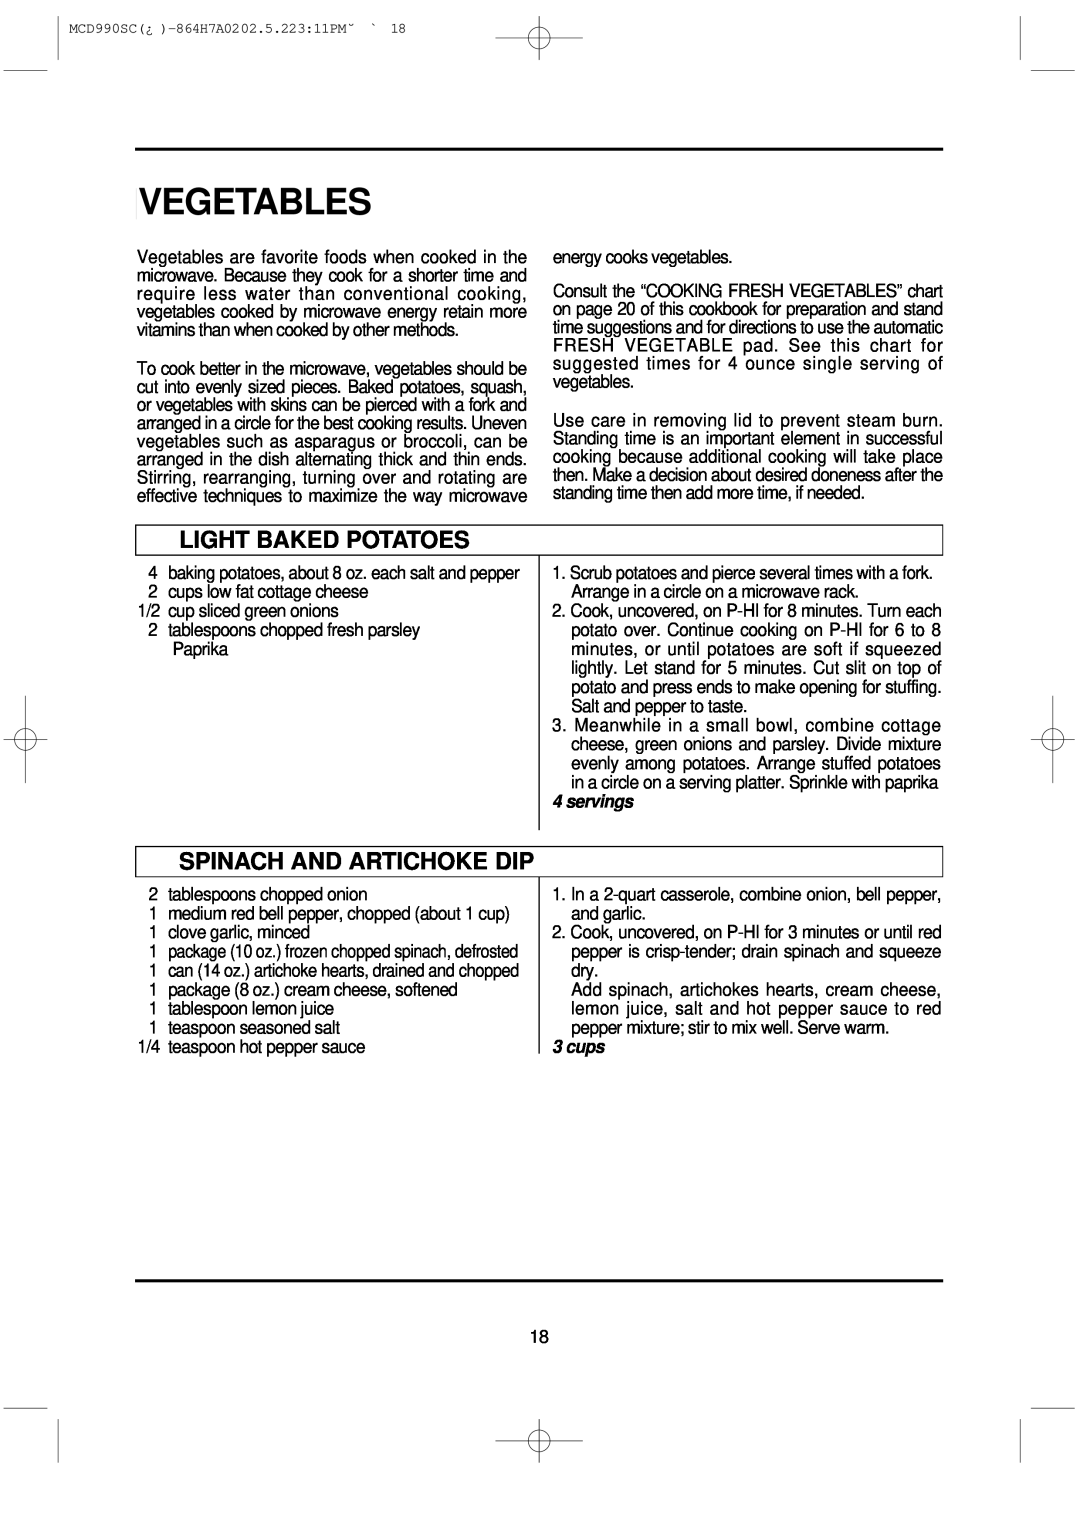 Magic Chef MCD990SC instruction manual Vegetables, Light Baked Potatoes, Spinach And Artichoke Dip, servings, cups 